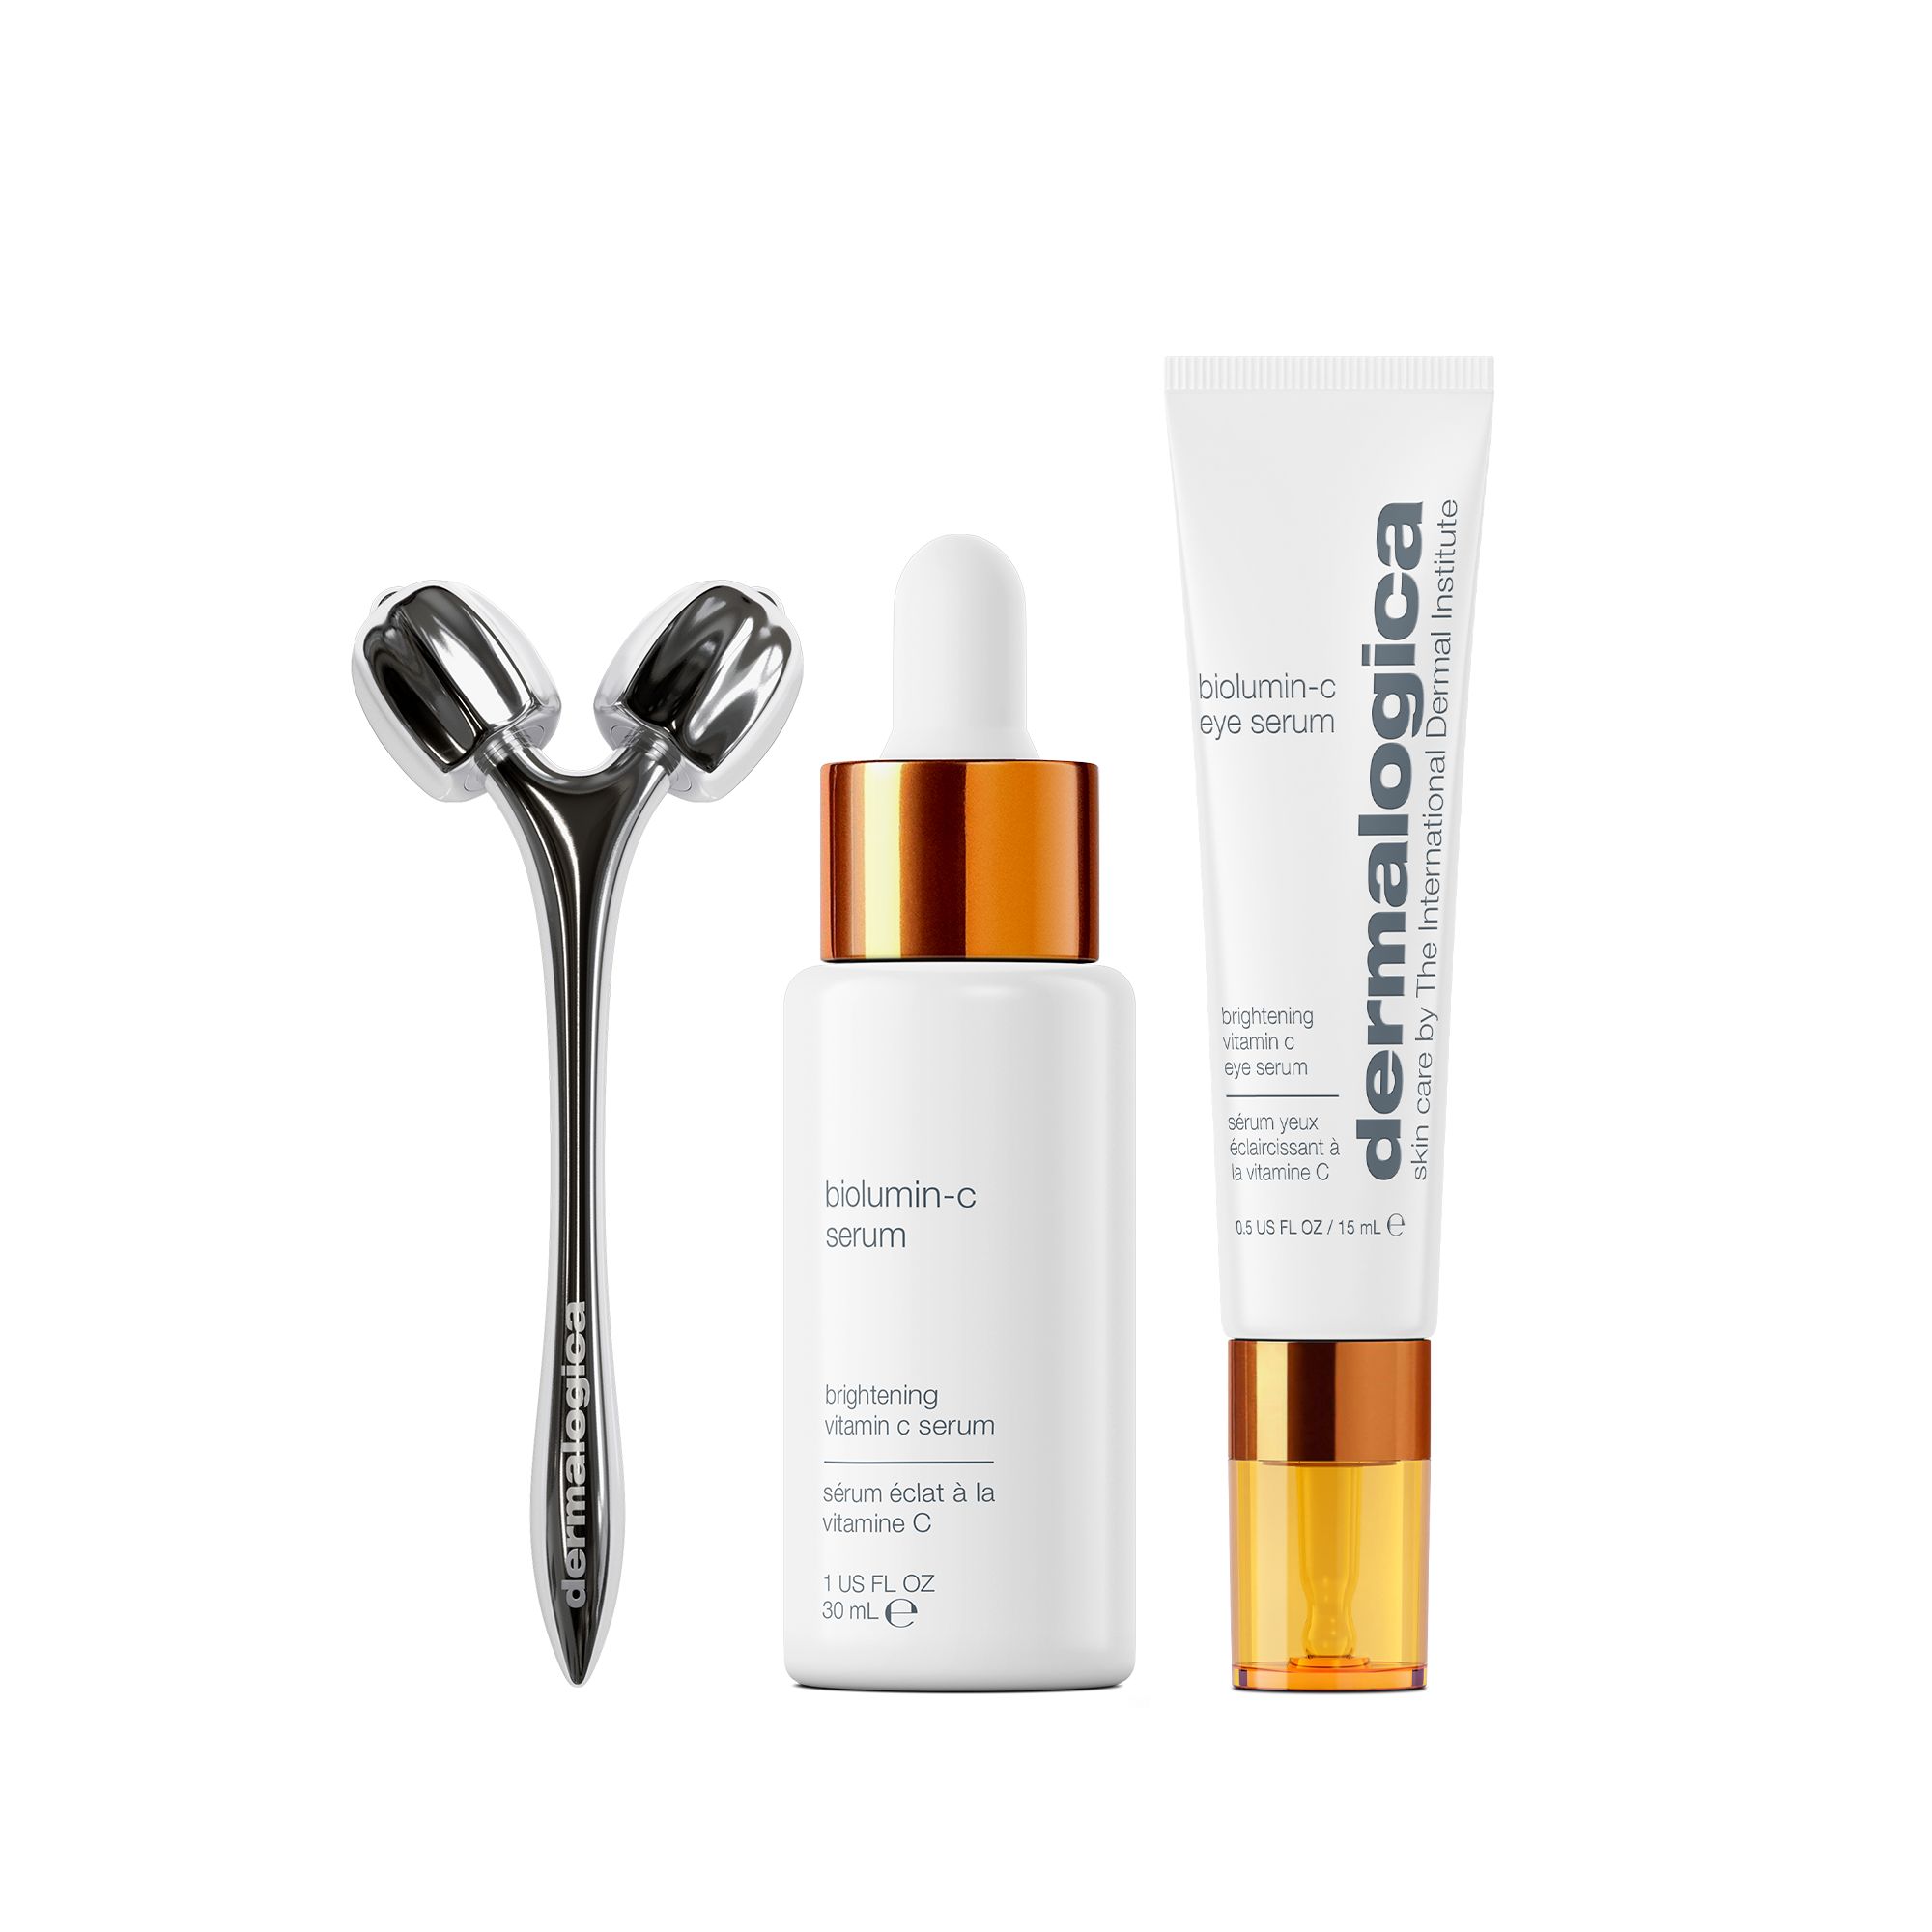 Dermalogica Holiday Collection 2023 Share the science of Skin Health